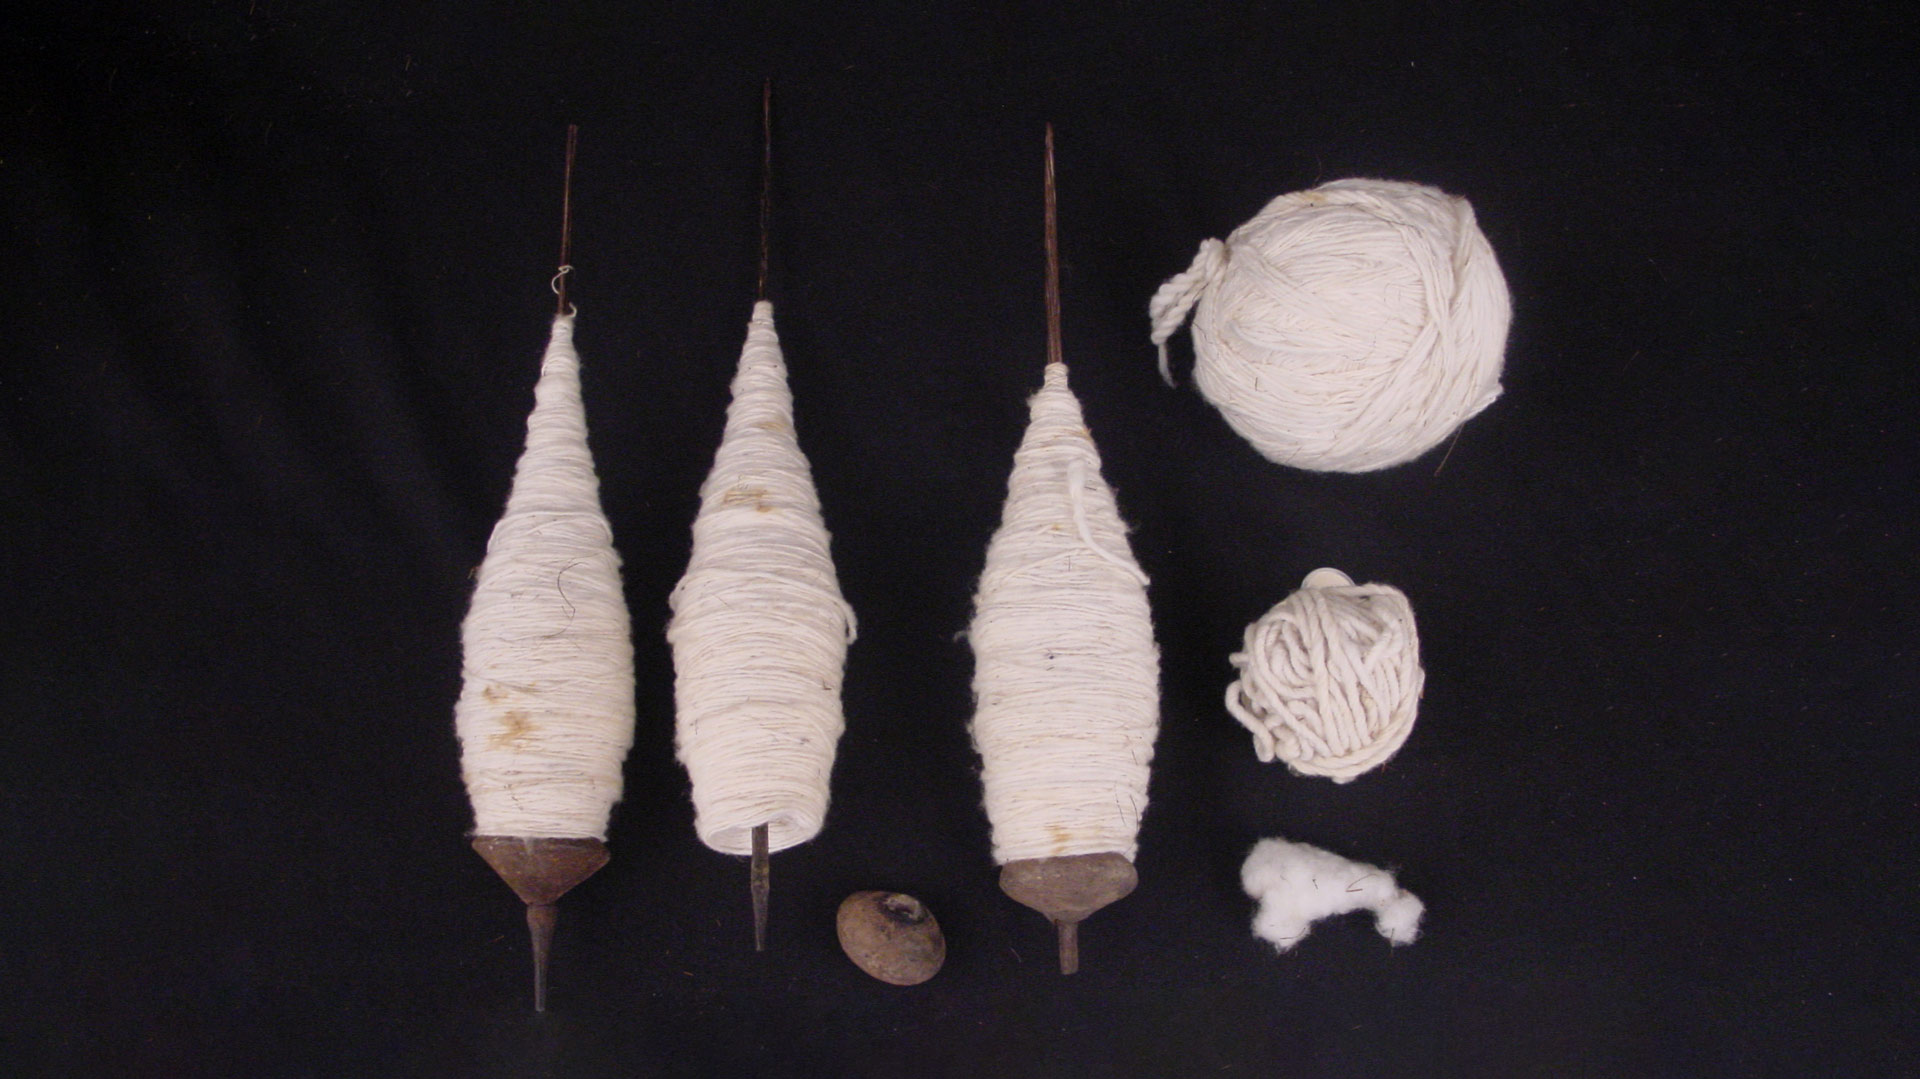 three spindles of white cotton yarn, two balls of white cotton yarn (large and small), and a small piece of white cotton fibers